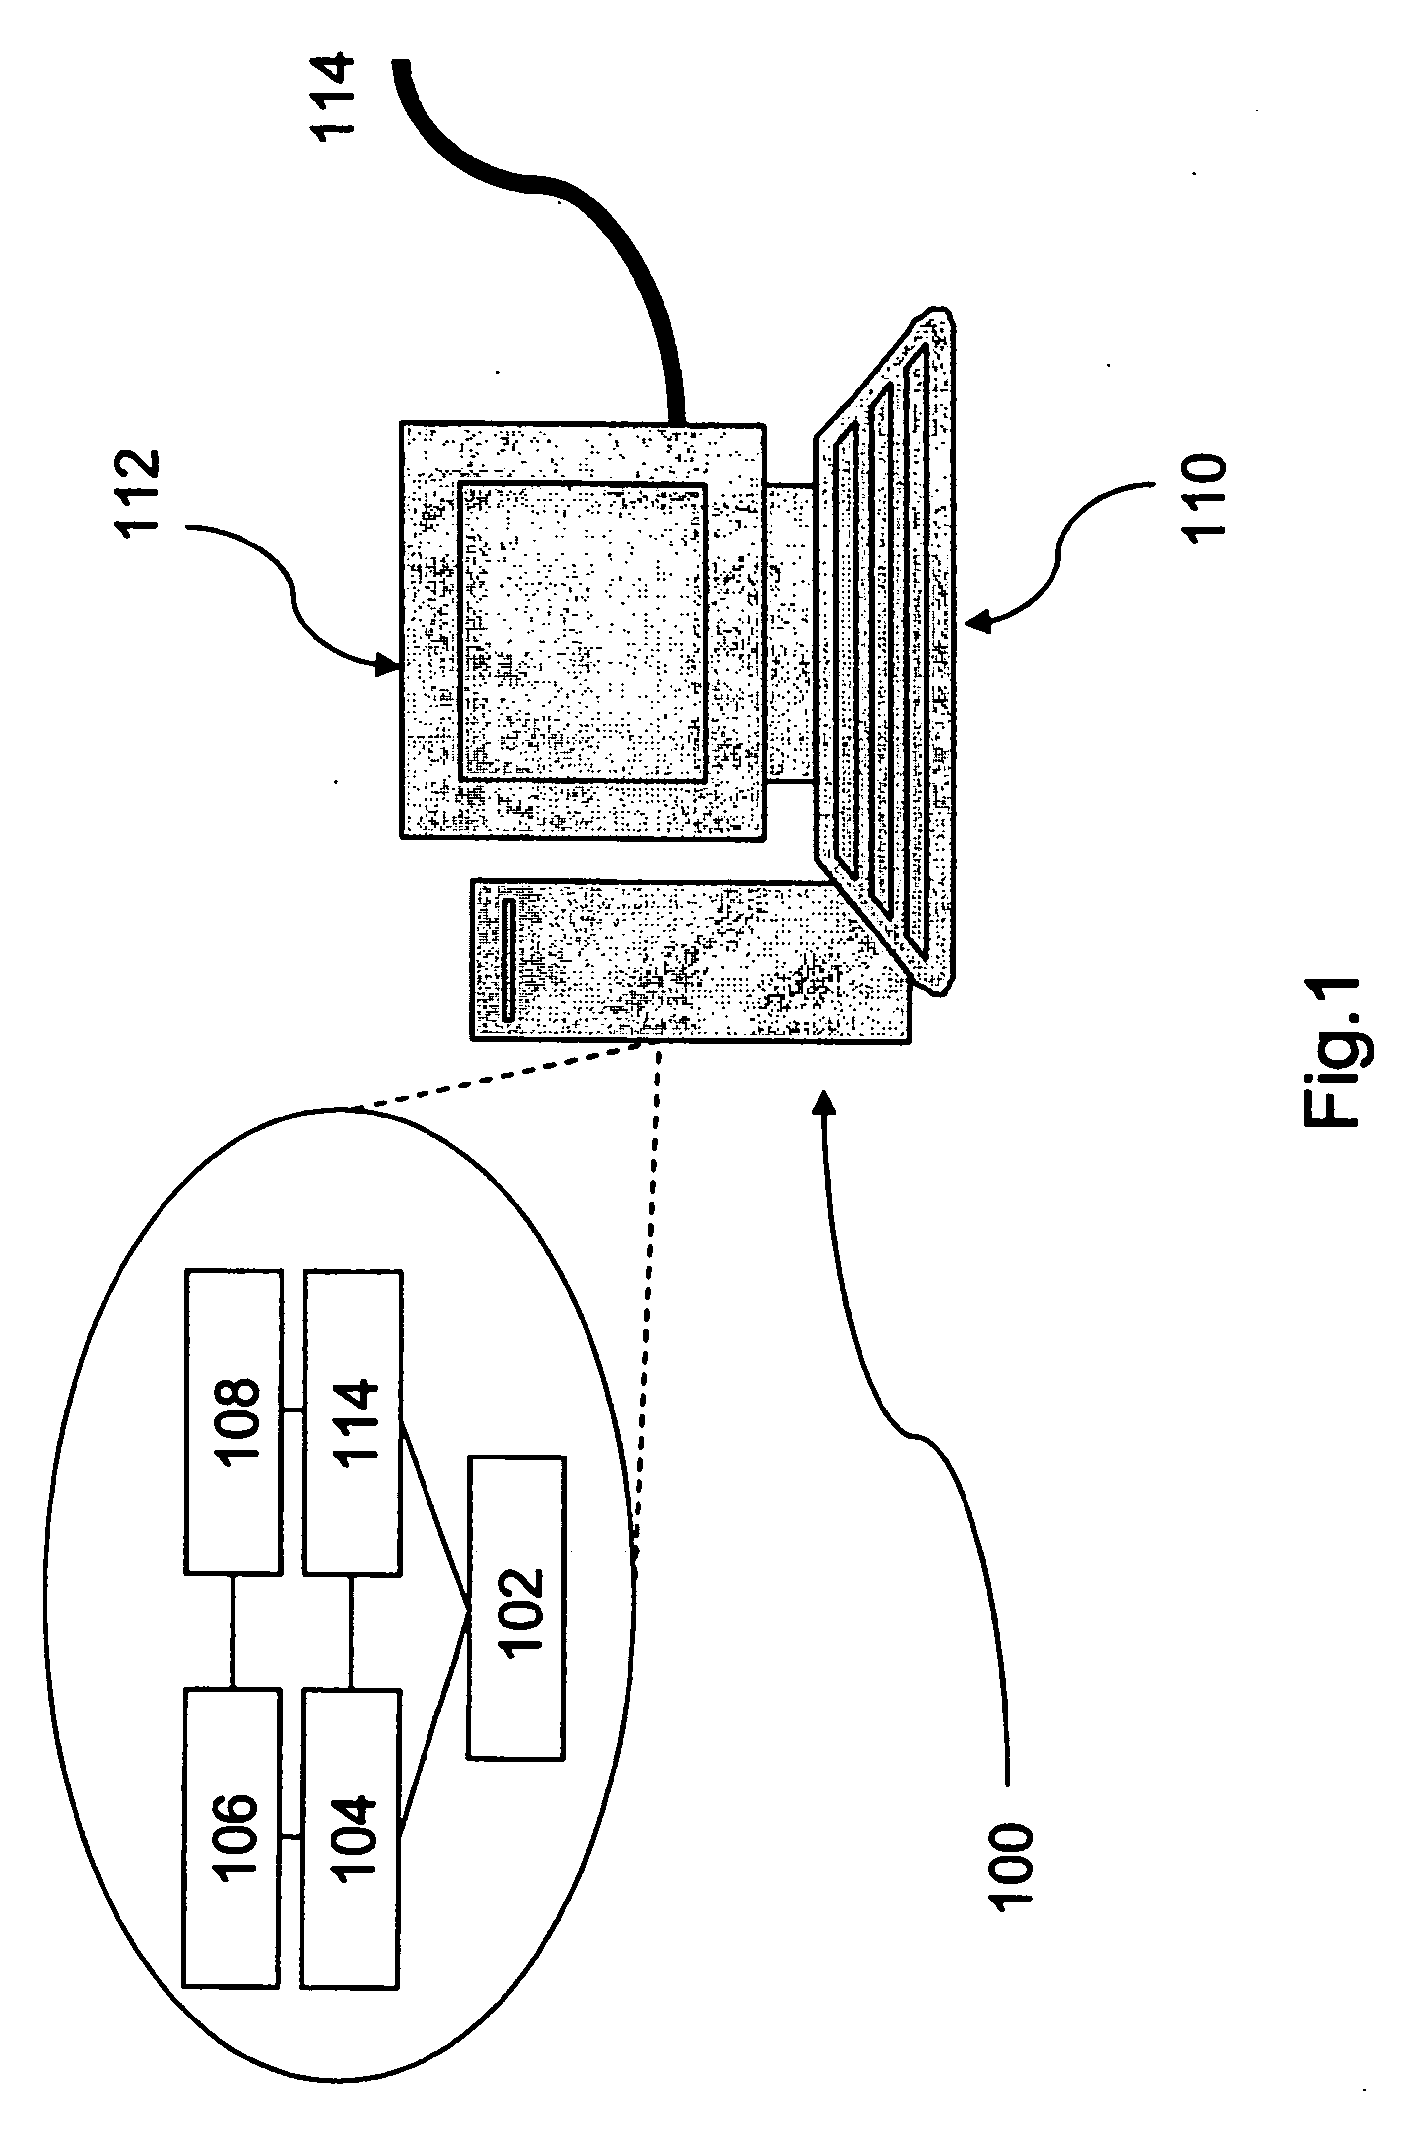 System and method for allocating transactions to a plurality of computing systems